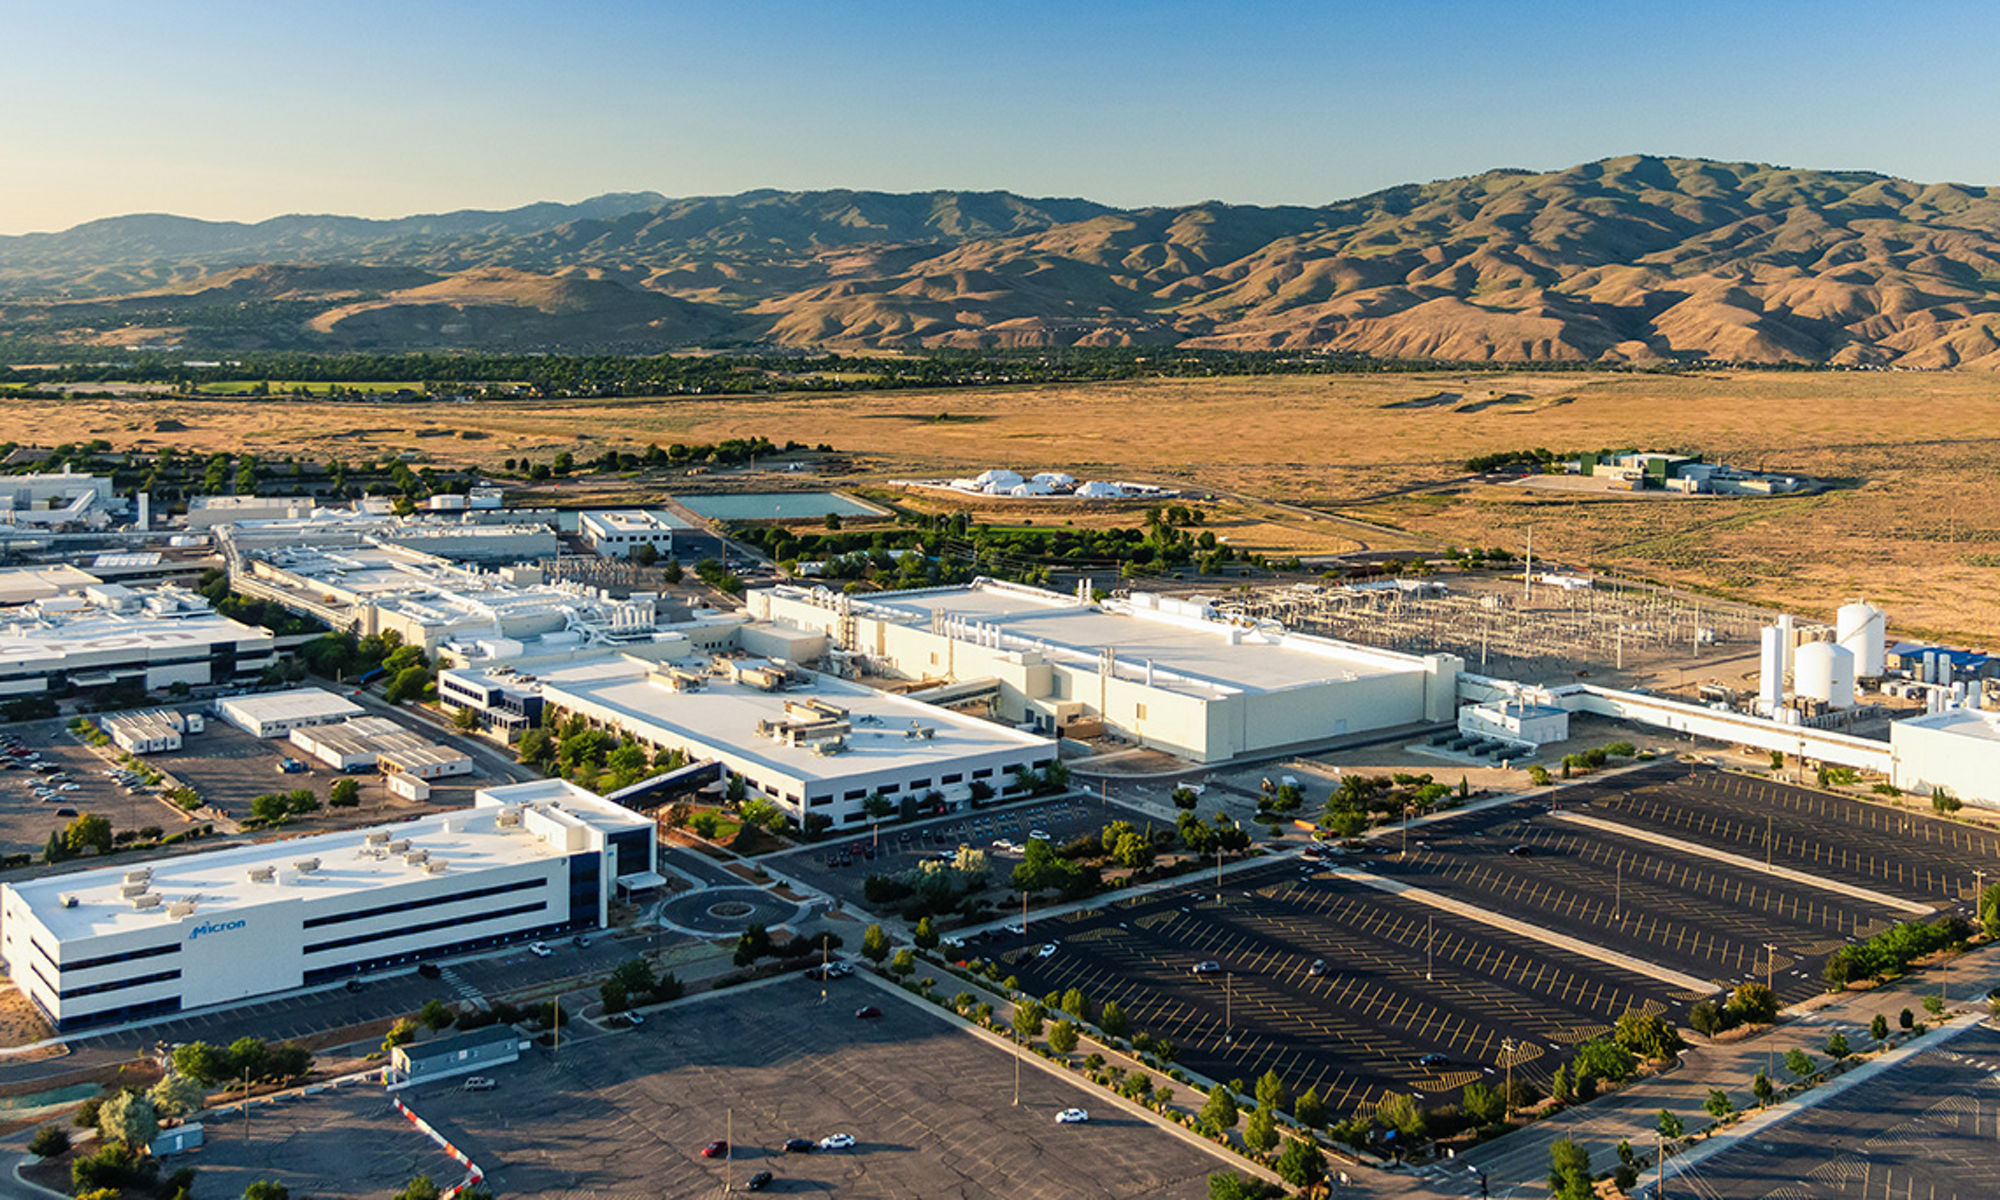 Micron Boise location from the air